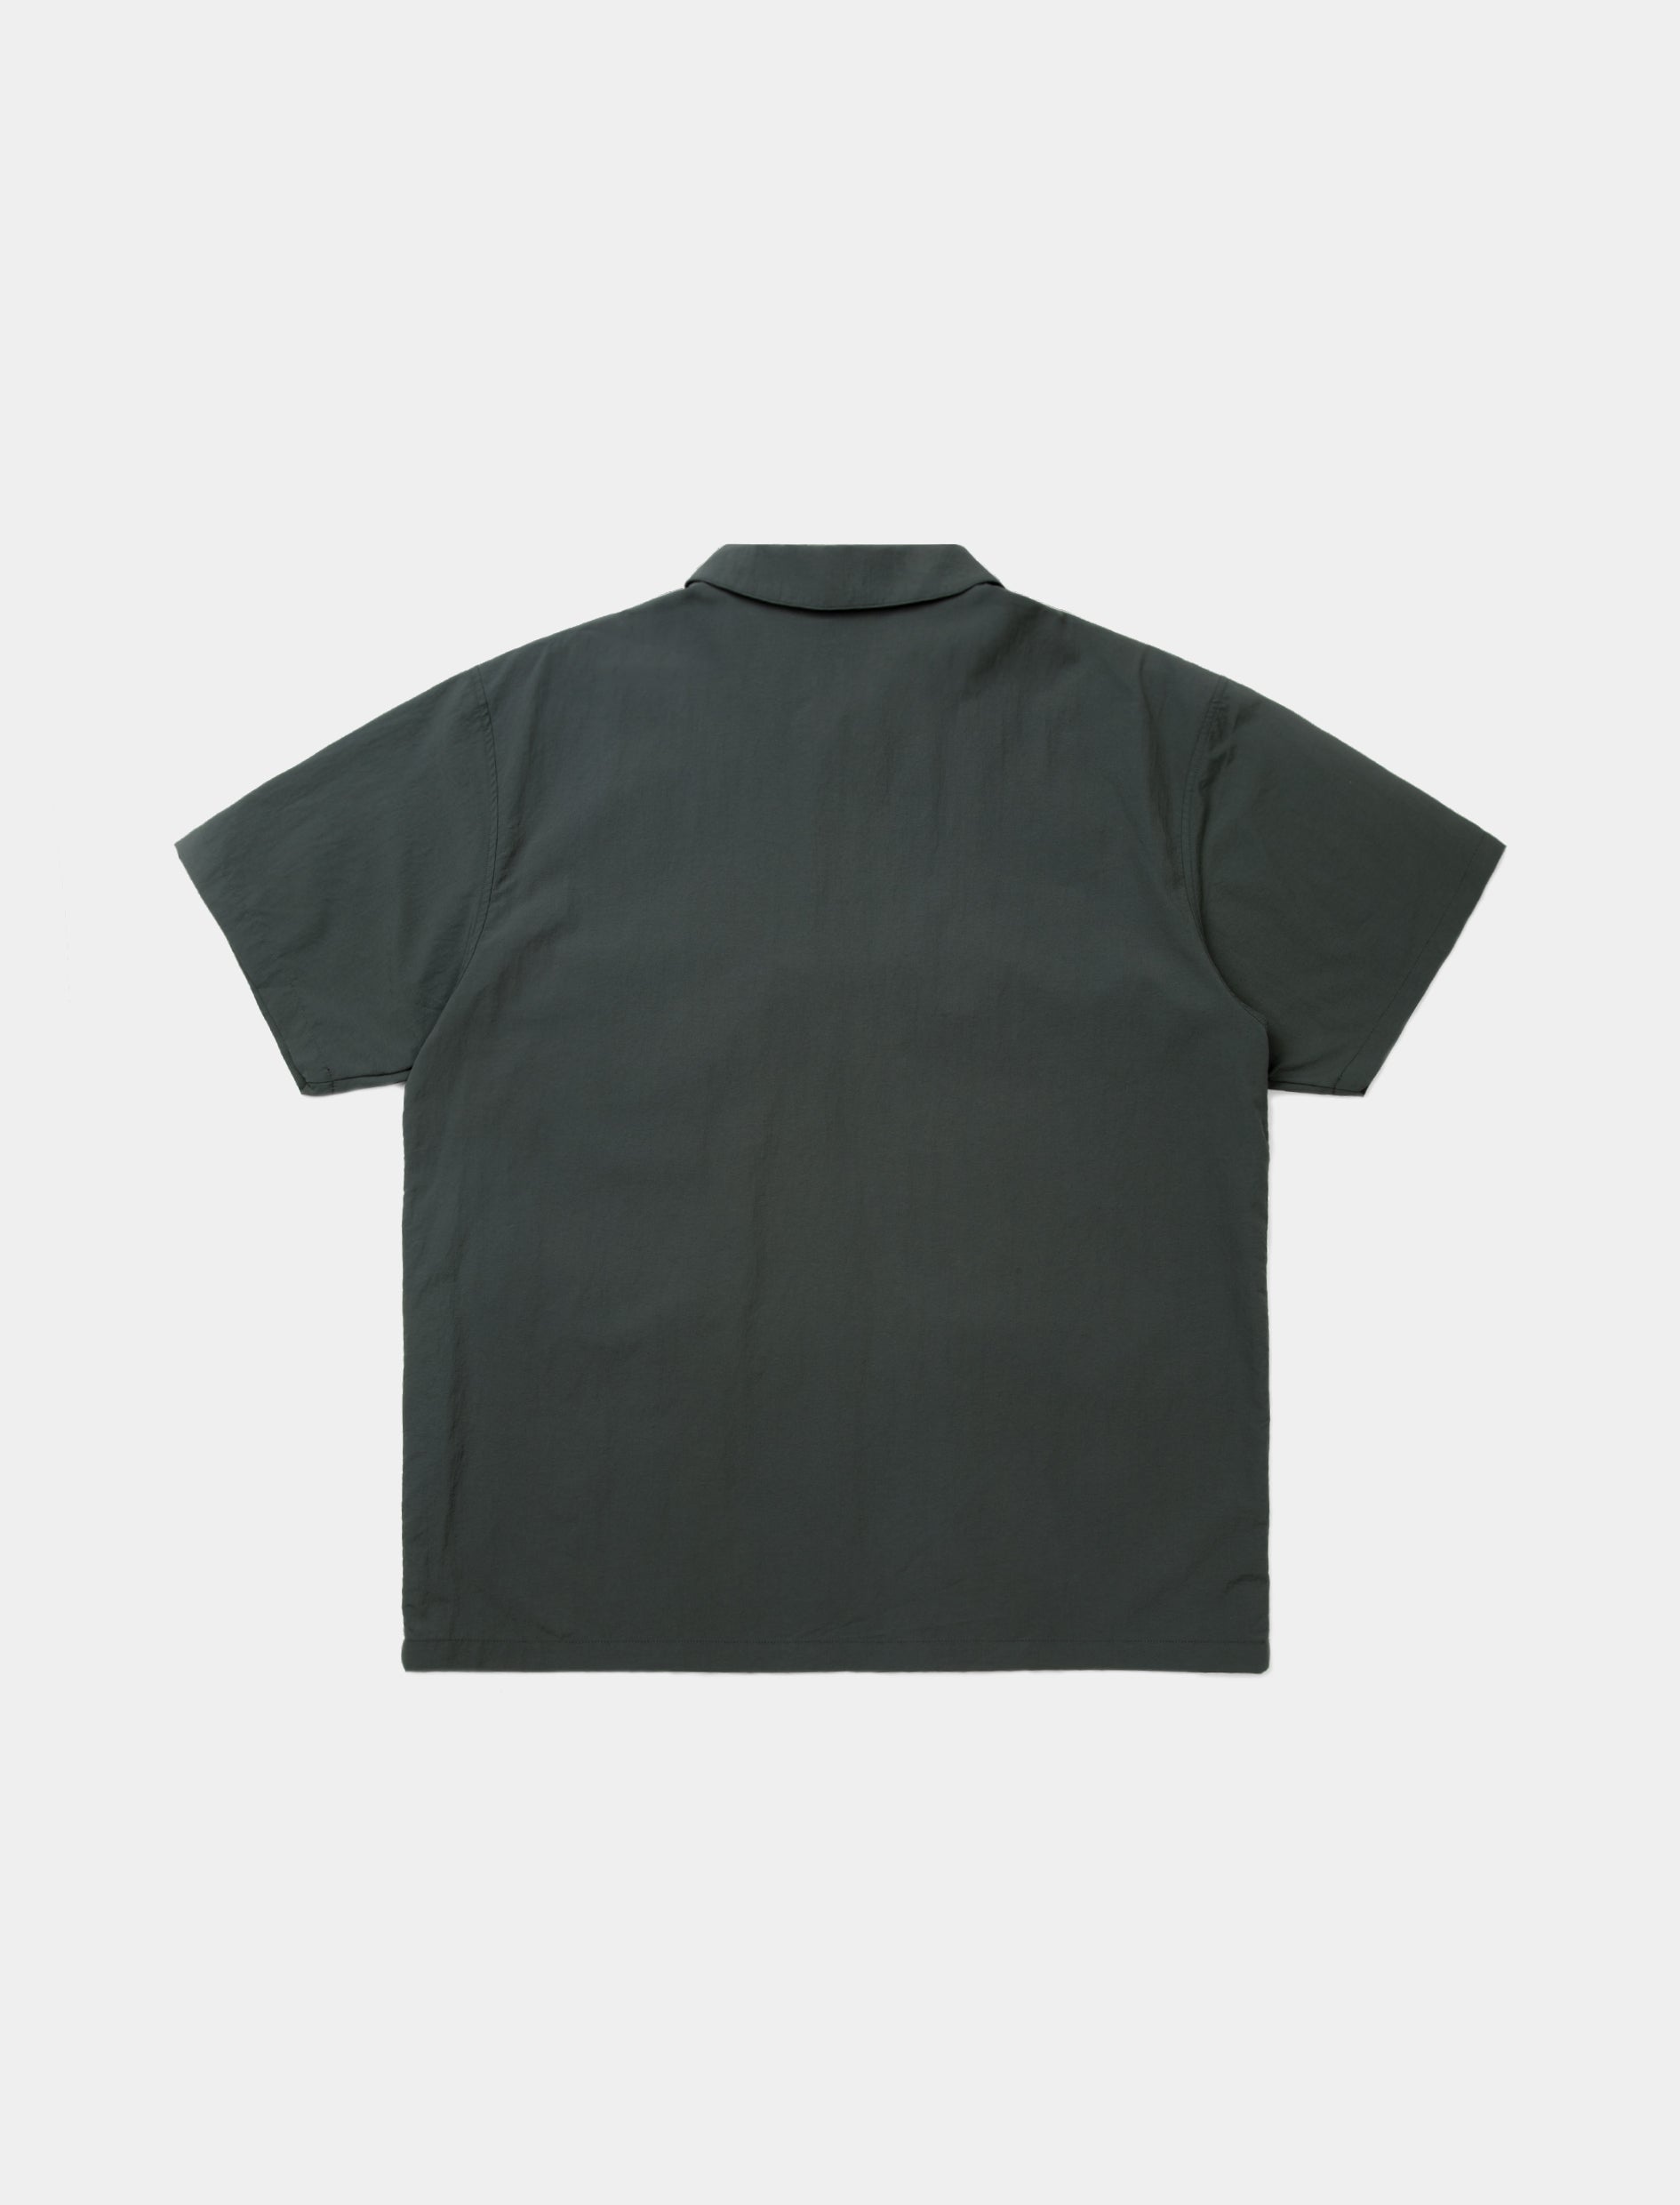 Shortsleeve Half Zip Shirt. 100% Lightwave polyester. Pocket and label on chest. Made in Italy.